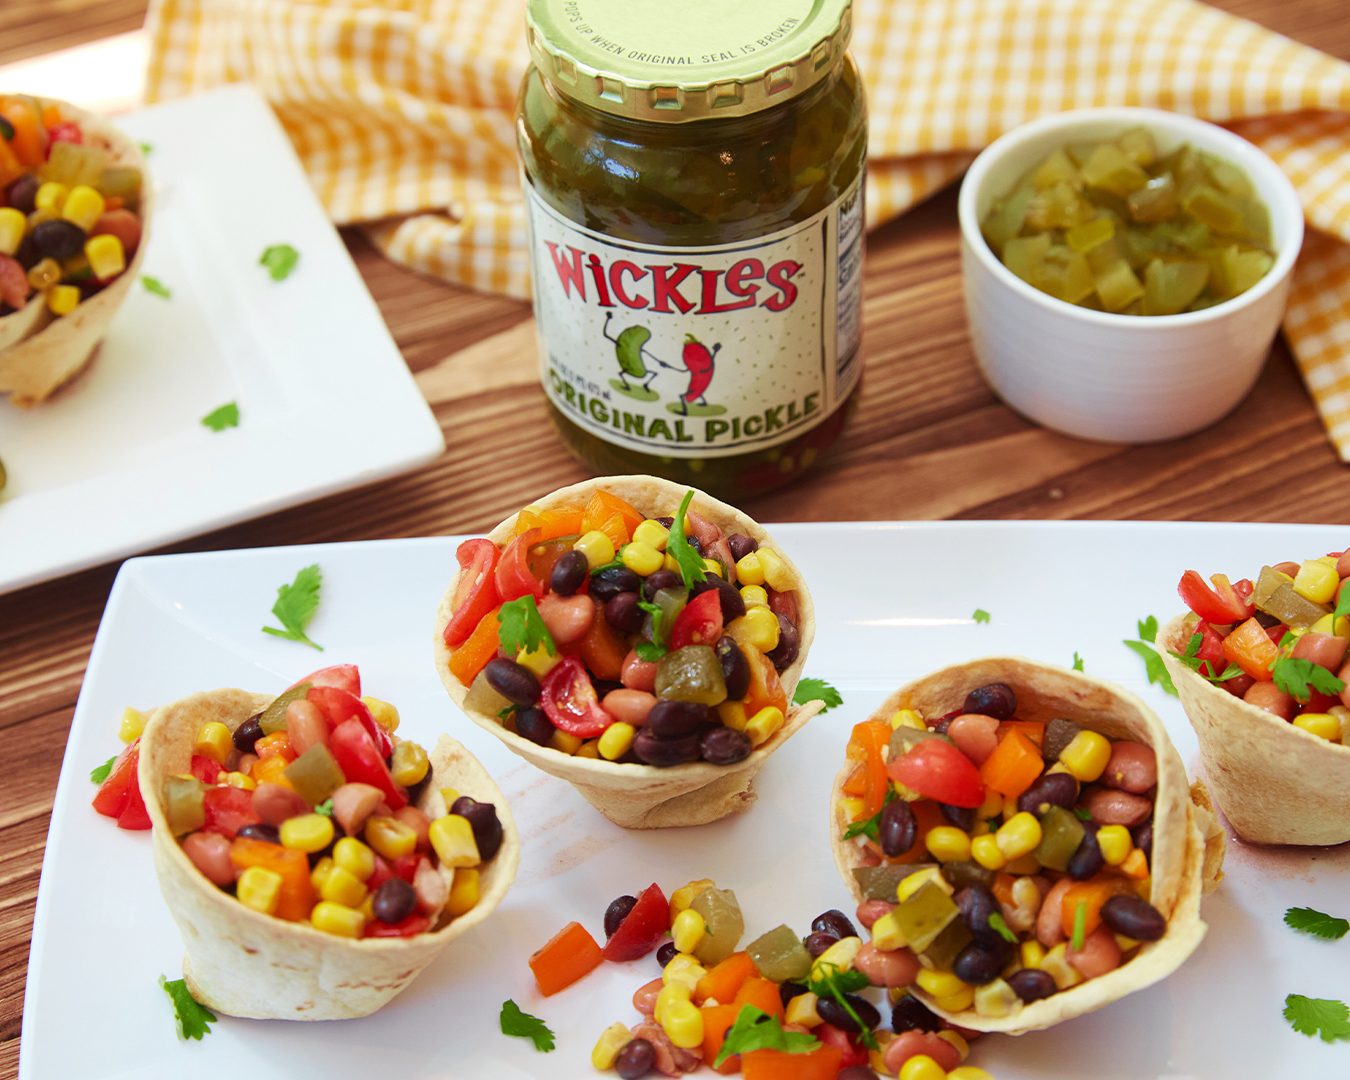 Wicked Cowboy Caviar with Wickles Pickles Original Pickles